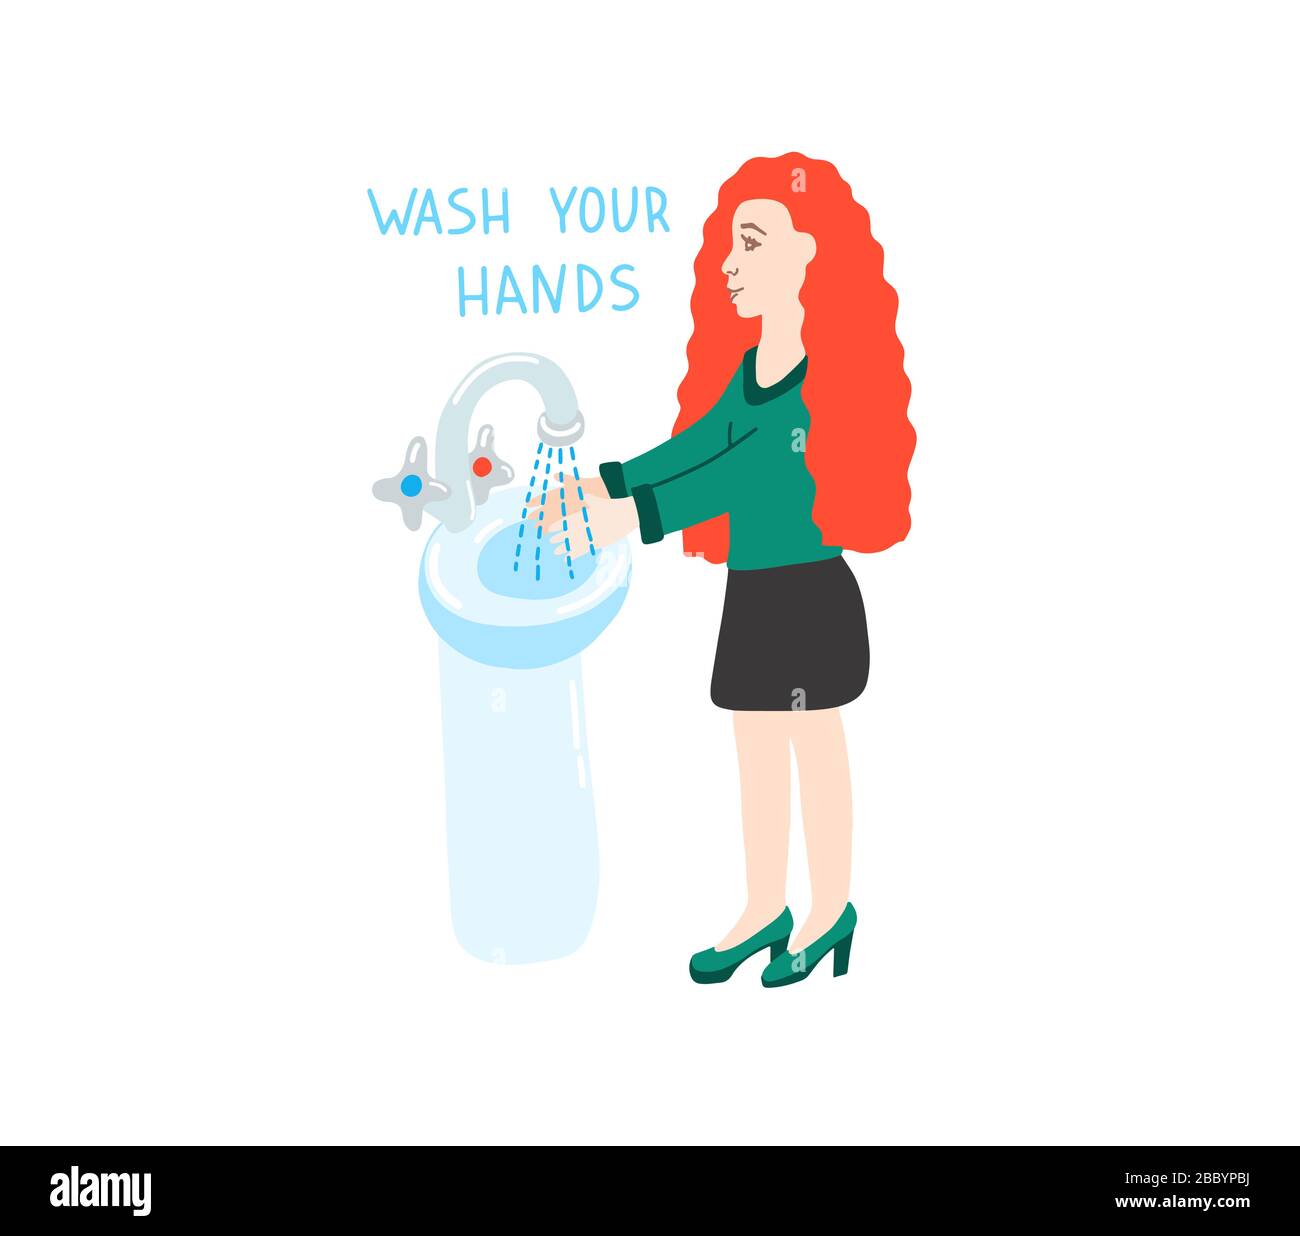 wash your hands - coronavirus quarantine motivational poster with beautiful girl with red hair Stock Vector